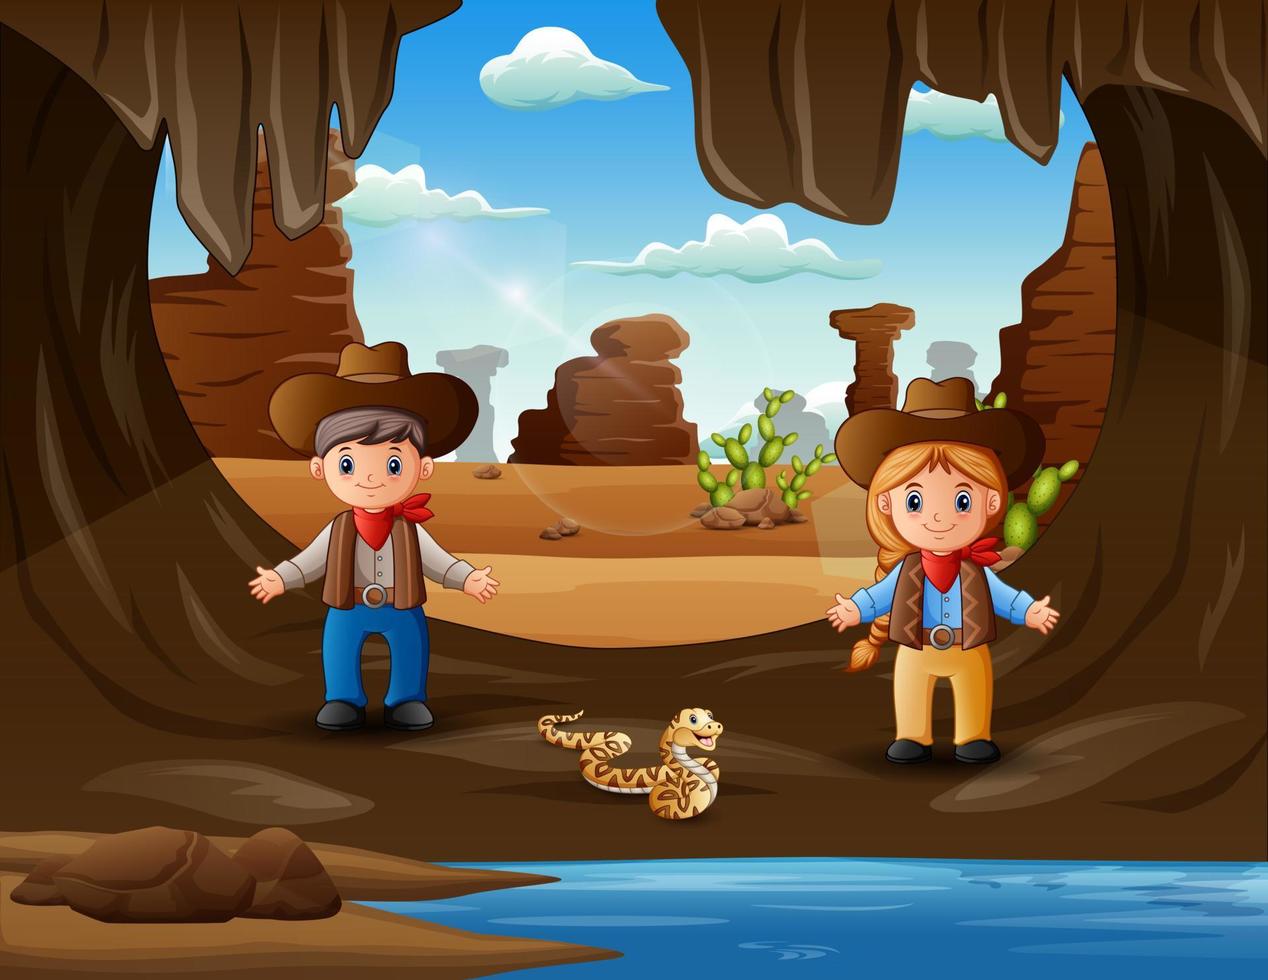 Cartoon cowboy and cowgirl at the cave illustration vector